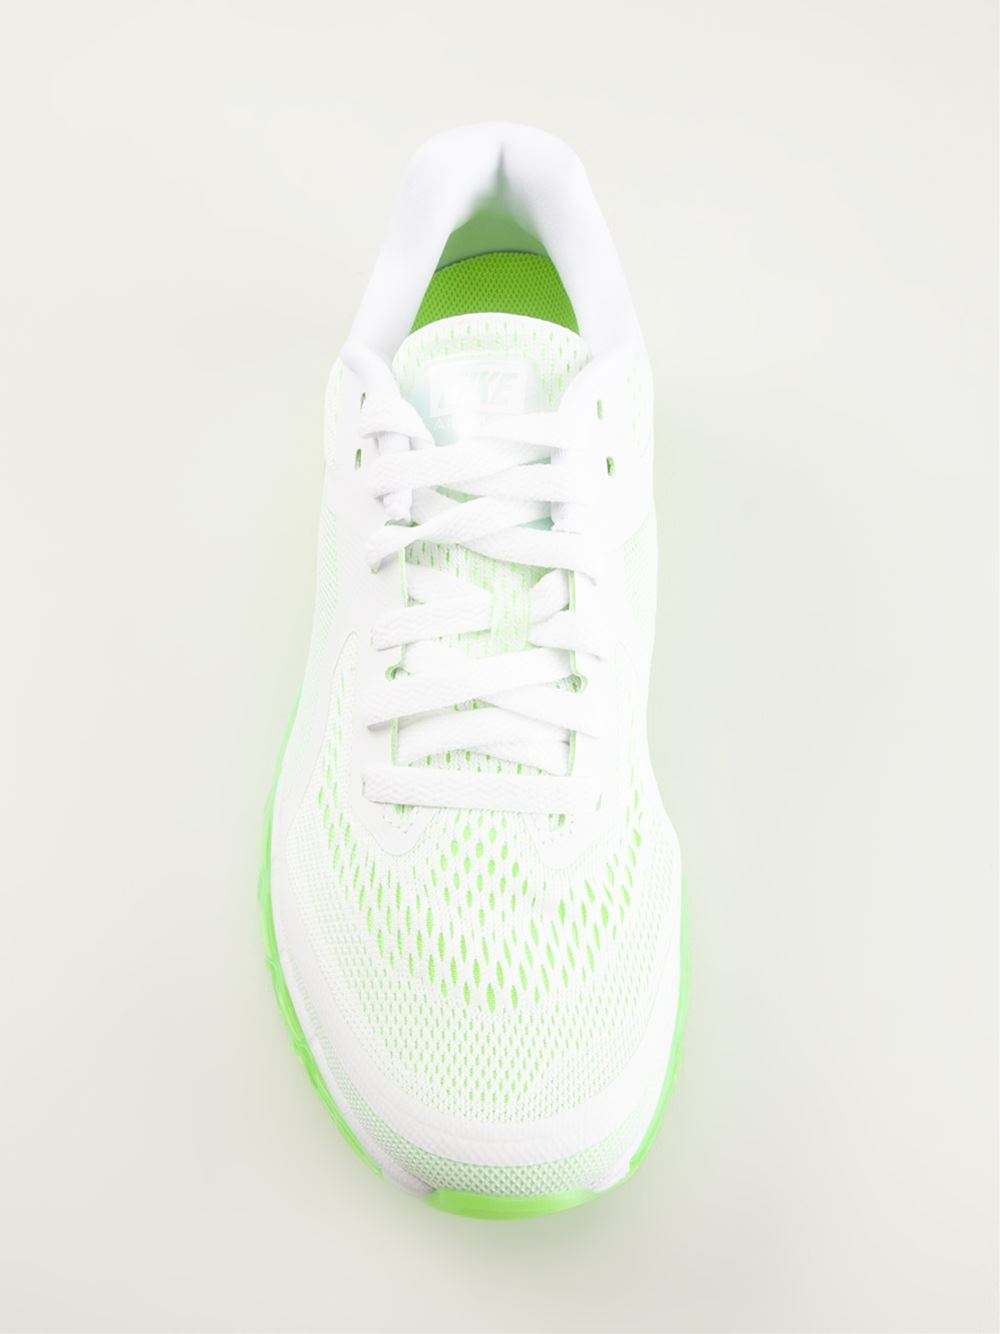 Nike 'Air Max 2014' Neon Sole Sneakers 